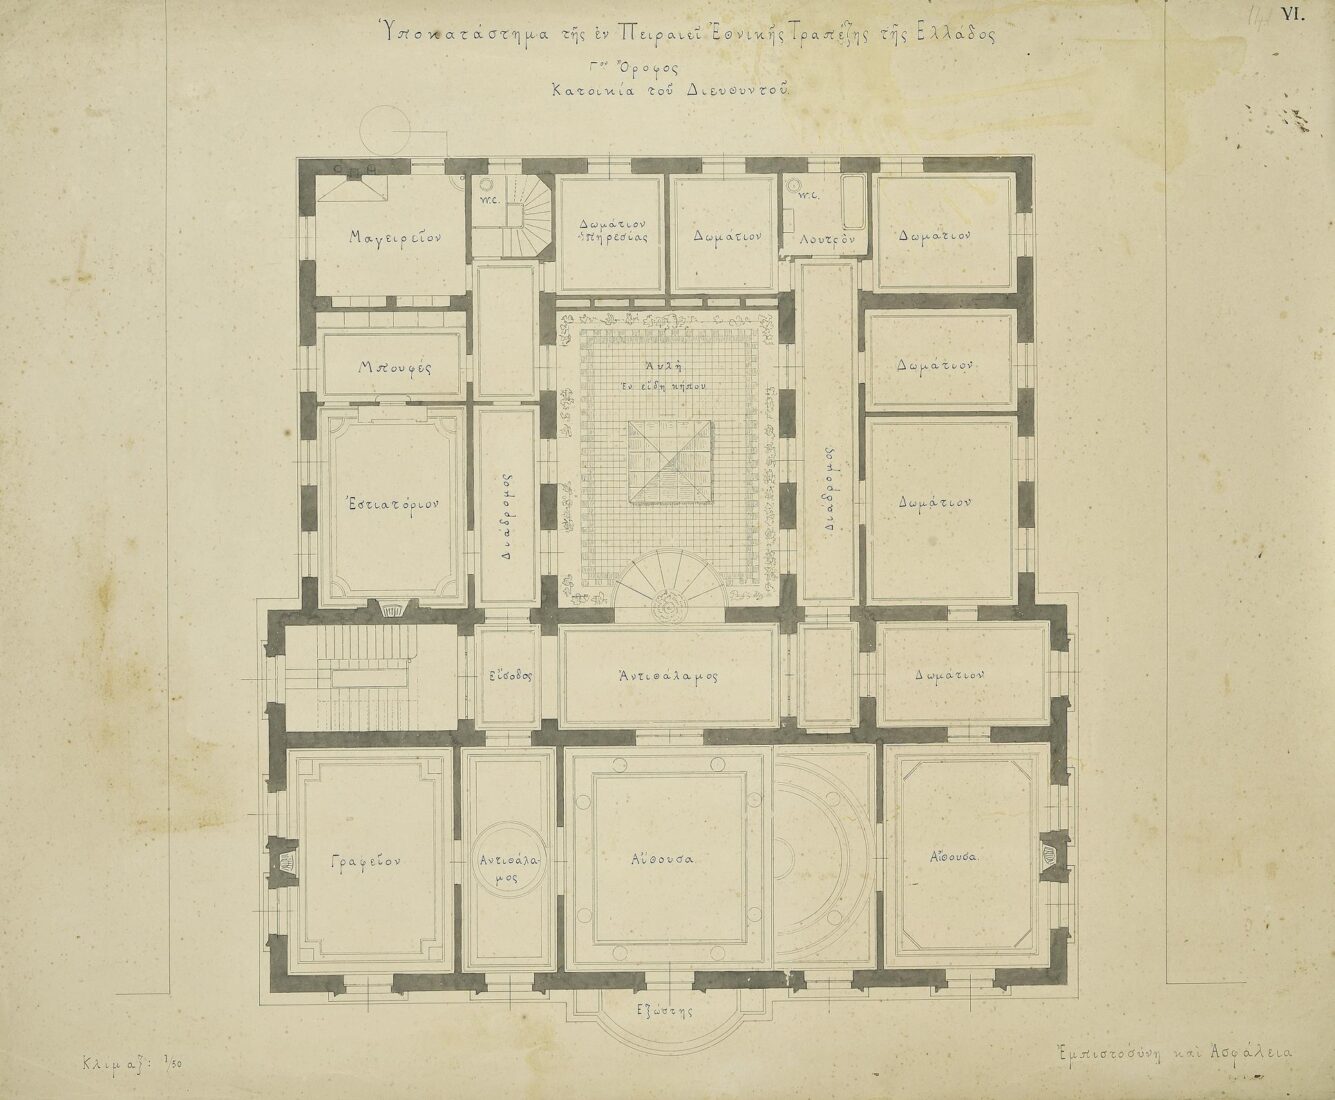 Branch of the National Bank of Greece, Piraeus, Iroon Polytehniou Street [former Athinas Street], Plan of the 3rd Floor, the Governor’s Domicile and the Atrium - Ziller Ernst